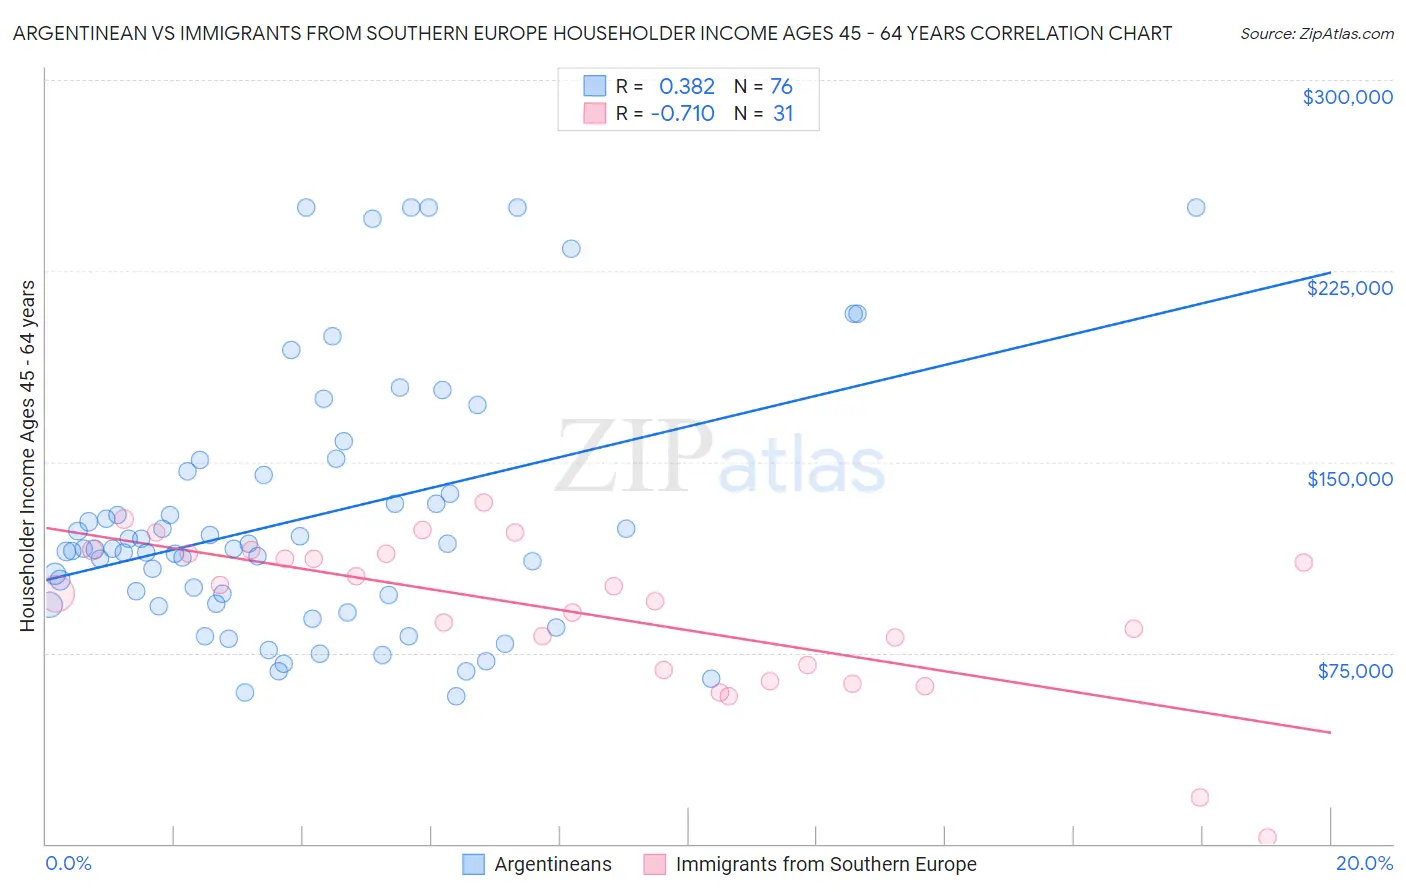 Argentinean vs Immigrants from Southern Europe Householder Income Ages 45 - 64 years